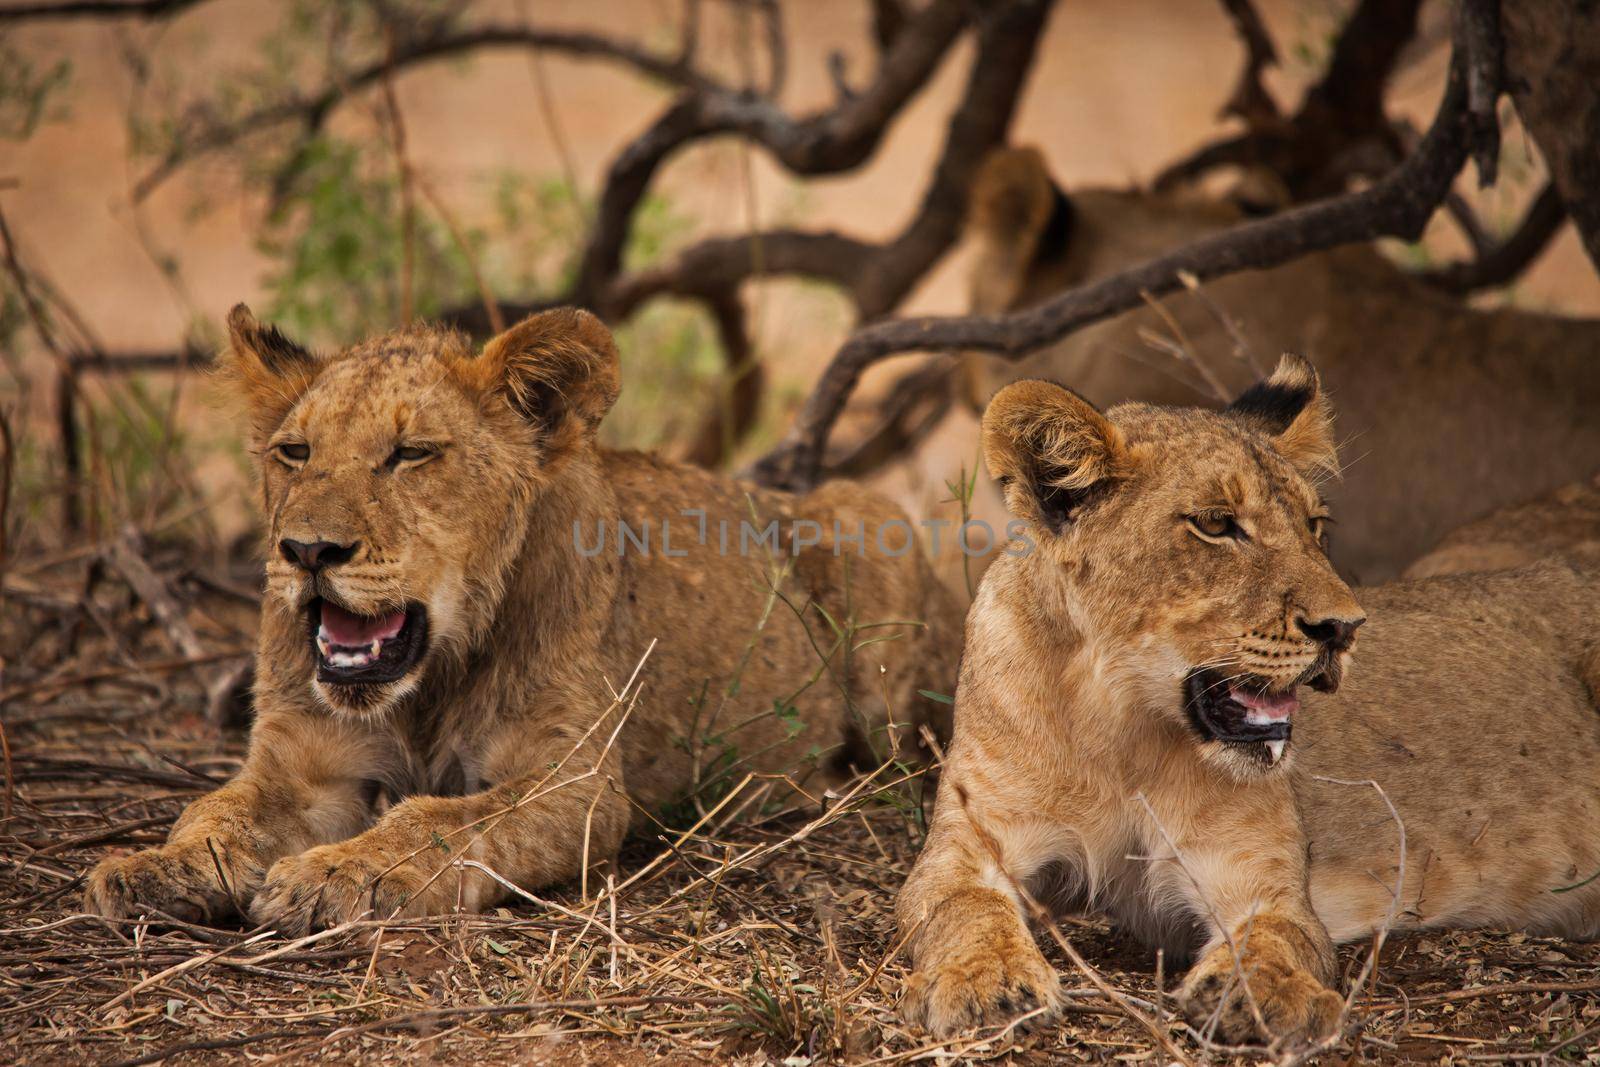 Sub-adult lions resting 14982 by kobus_peche